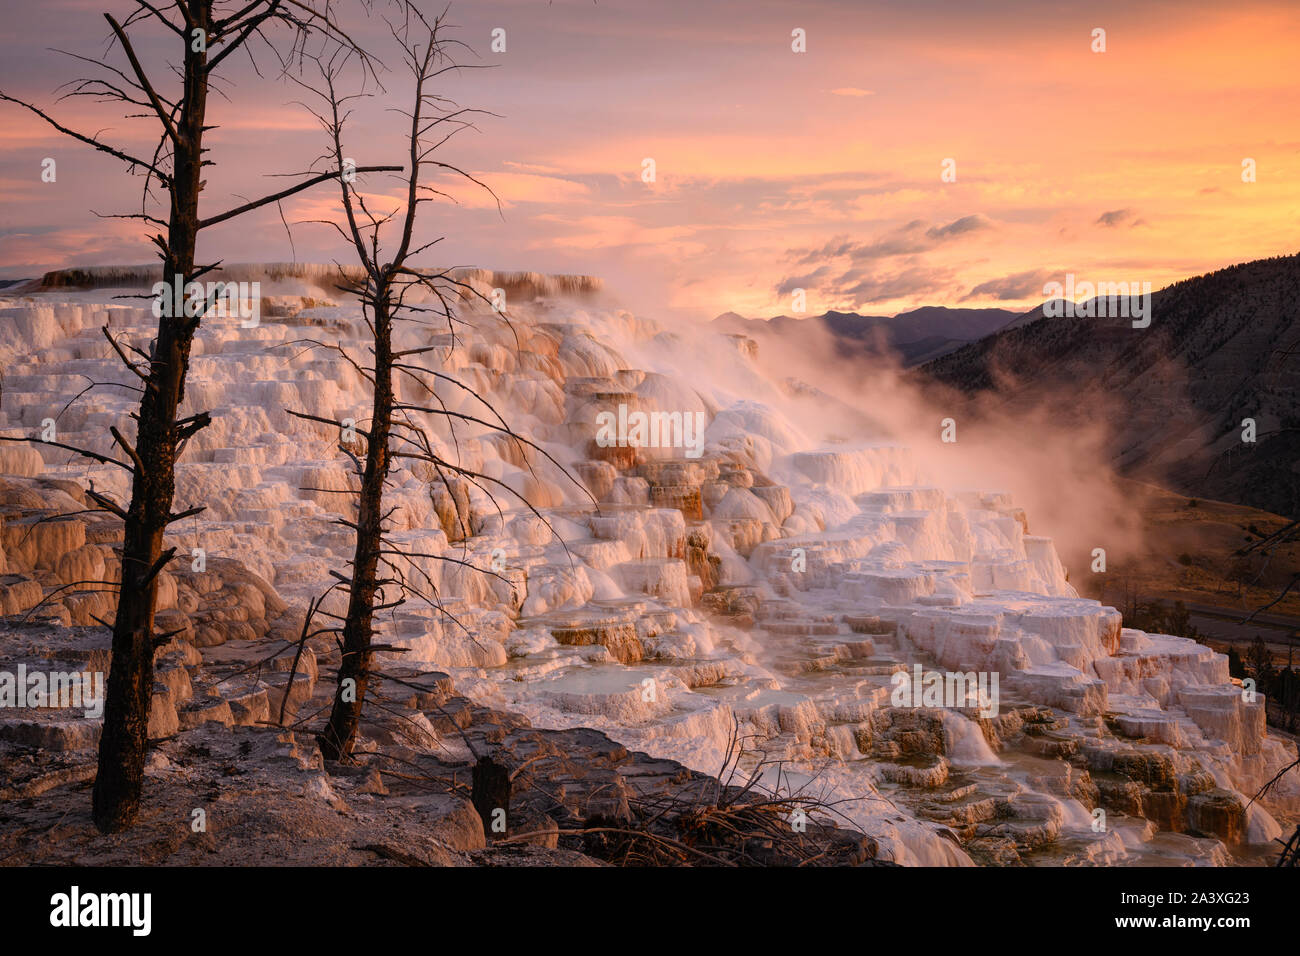 Canary Spring travertine formations at sunrise, Upper Mammoth Terraces, Yellowstone National Park, Wyoming, USA. Stock Photo